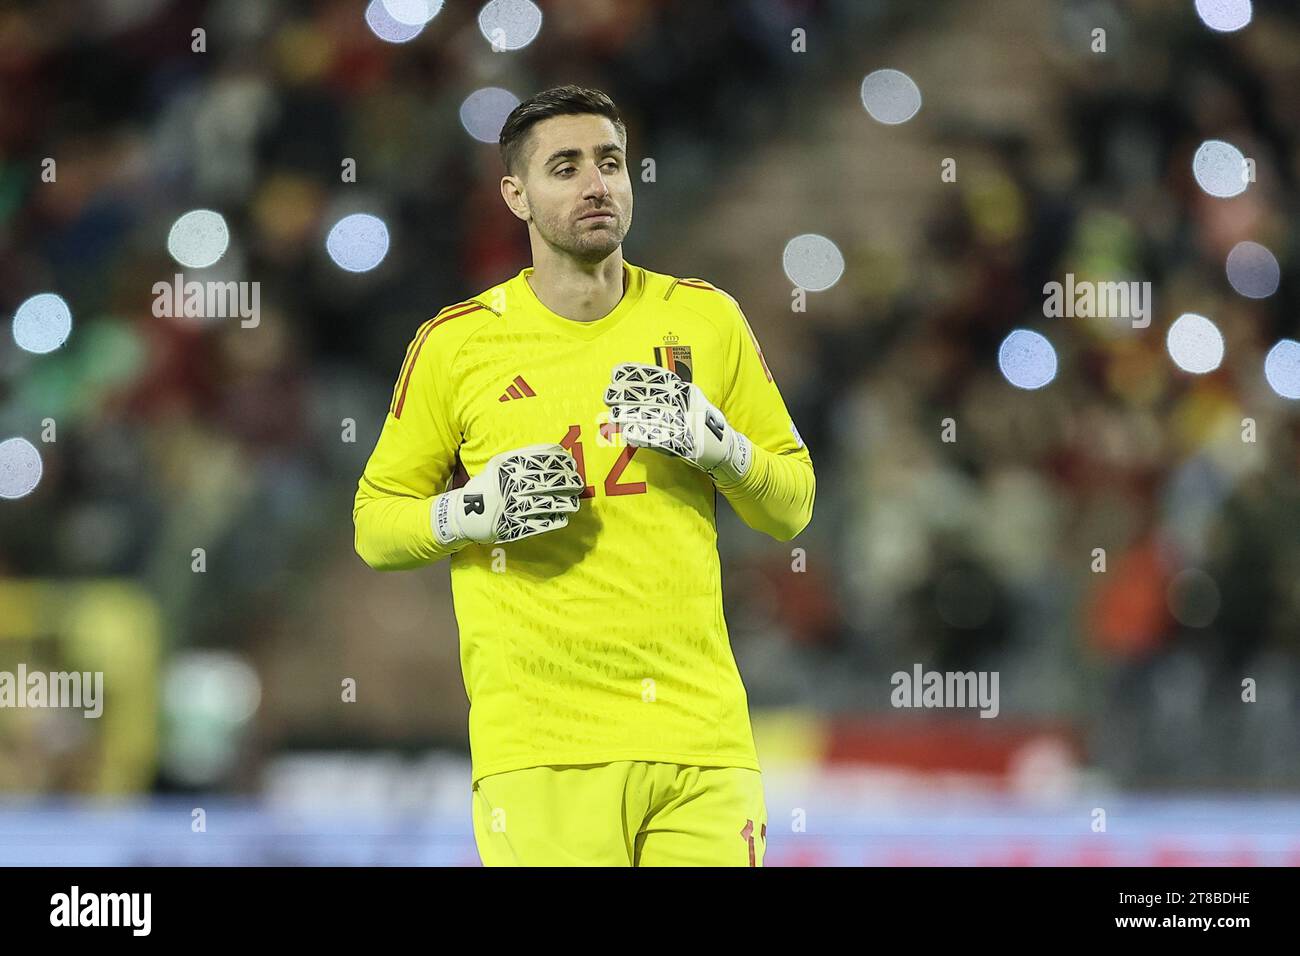 Brussels, Belgium. 19th Nov, 2023. Belgium's goalkeeper Koen Casteels pictured during a game between the Belgian national soccer team Red Devils and Azerbaijan, in Brussels, Sunday 19 November 2023, match 8/8 in Group F of the qualifications for the European Soccer Championships 2024. BELGA PHOTO BRUNO FAHY Credit: Belga News Agency/Alamy Live News Stock Photo